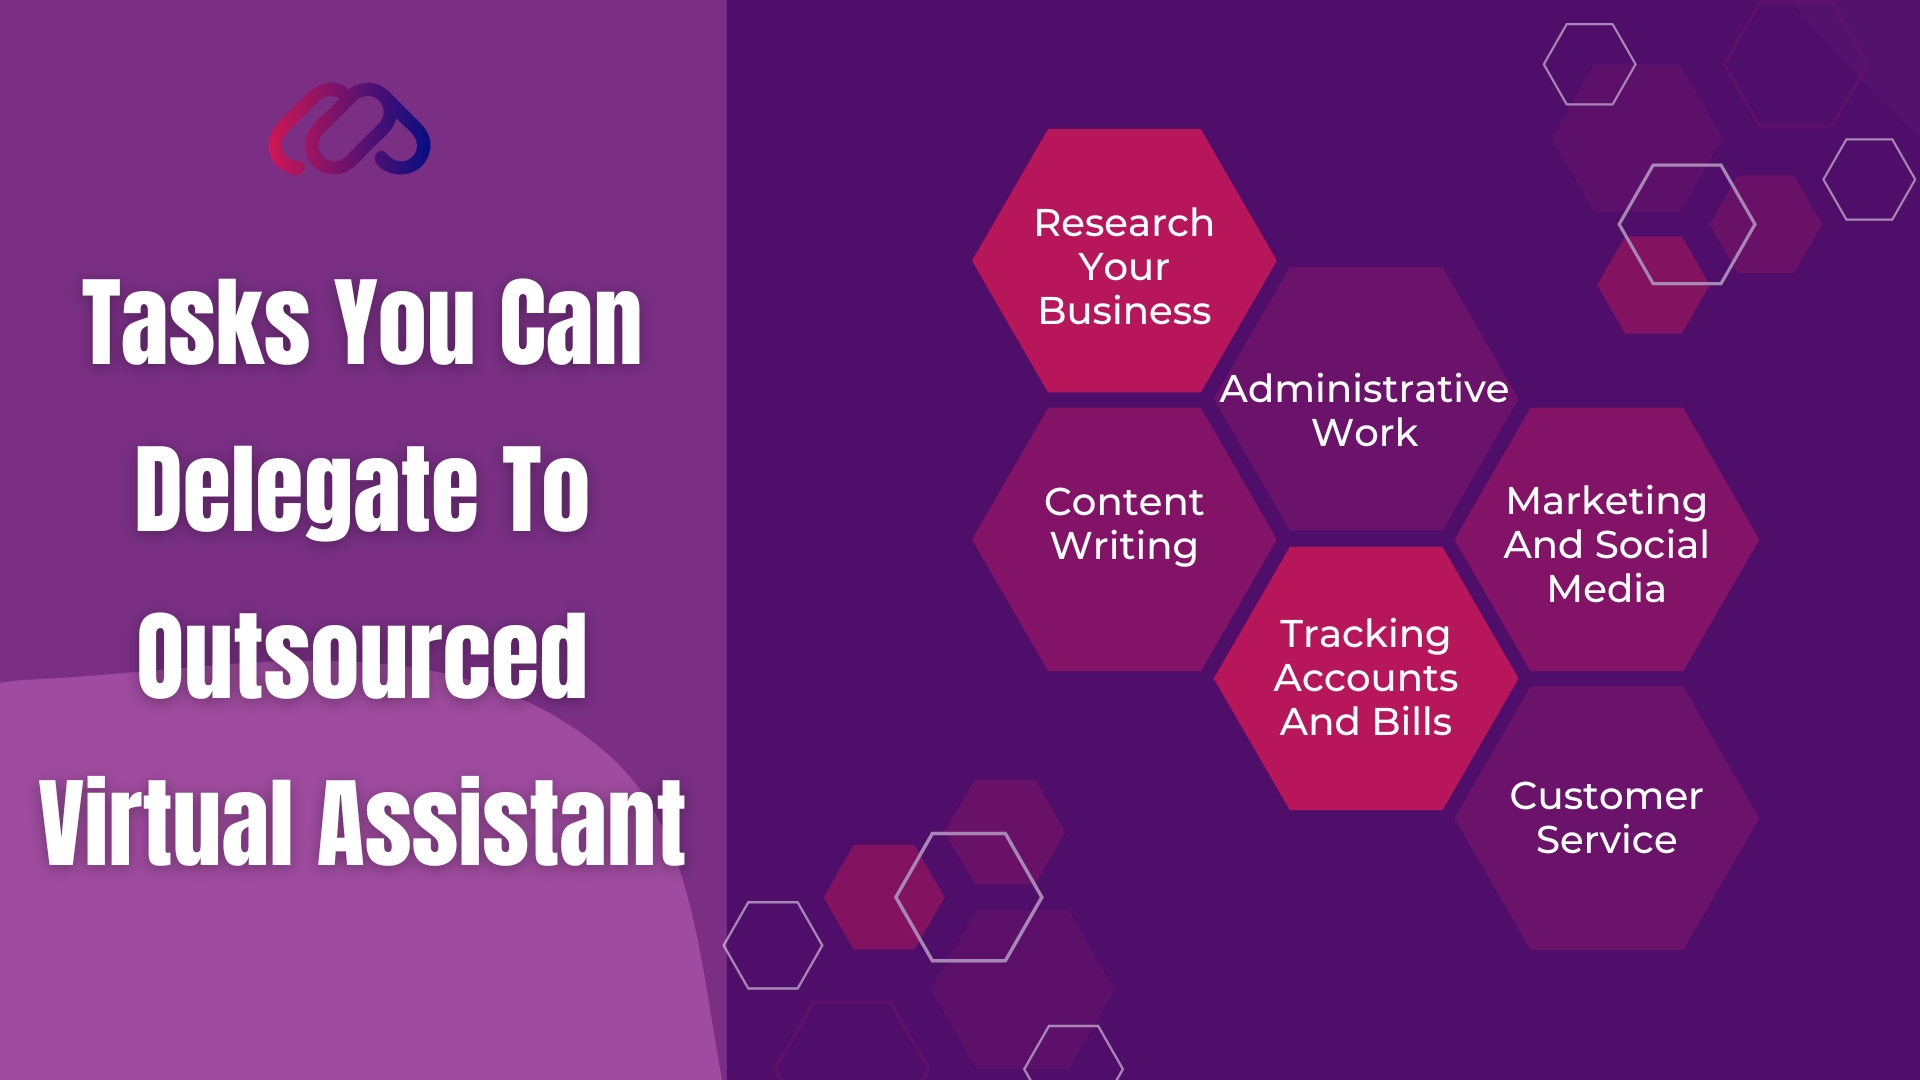 Tasks You Can Delegate to Outsourced Virtual Assistant